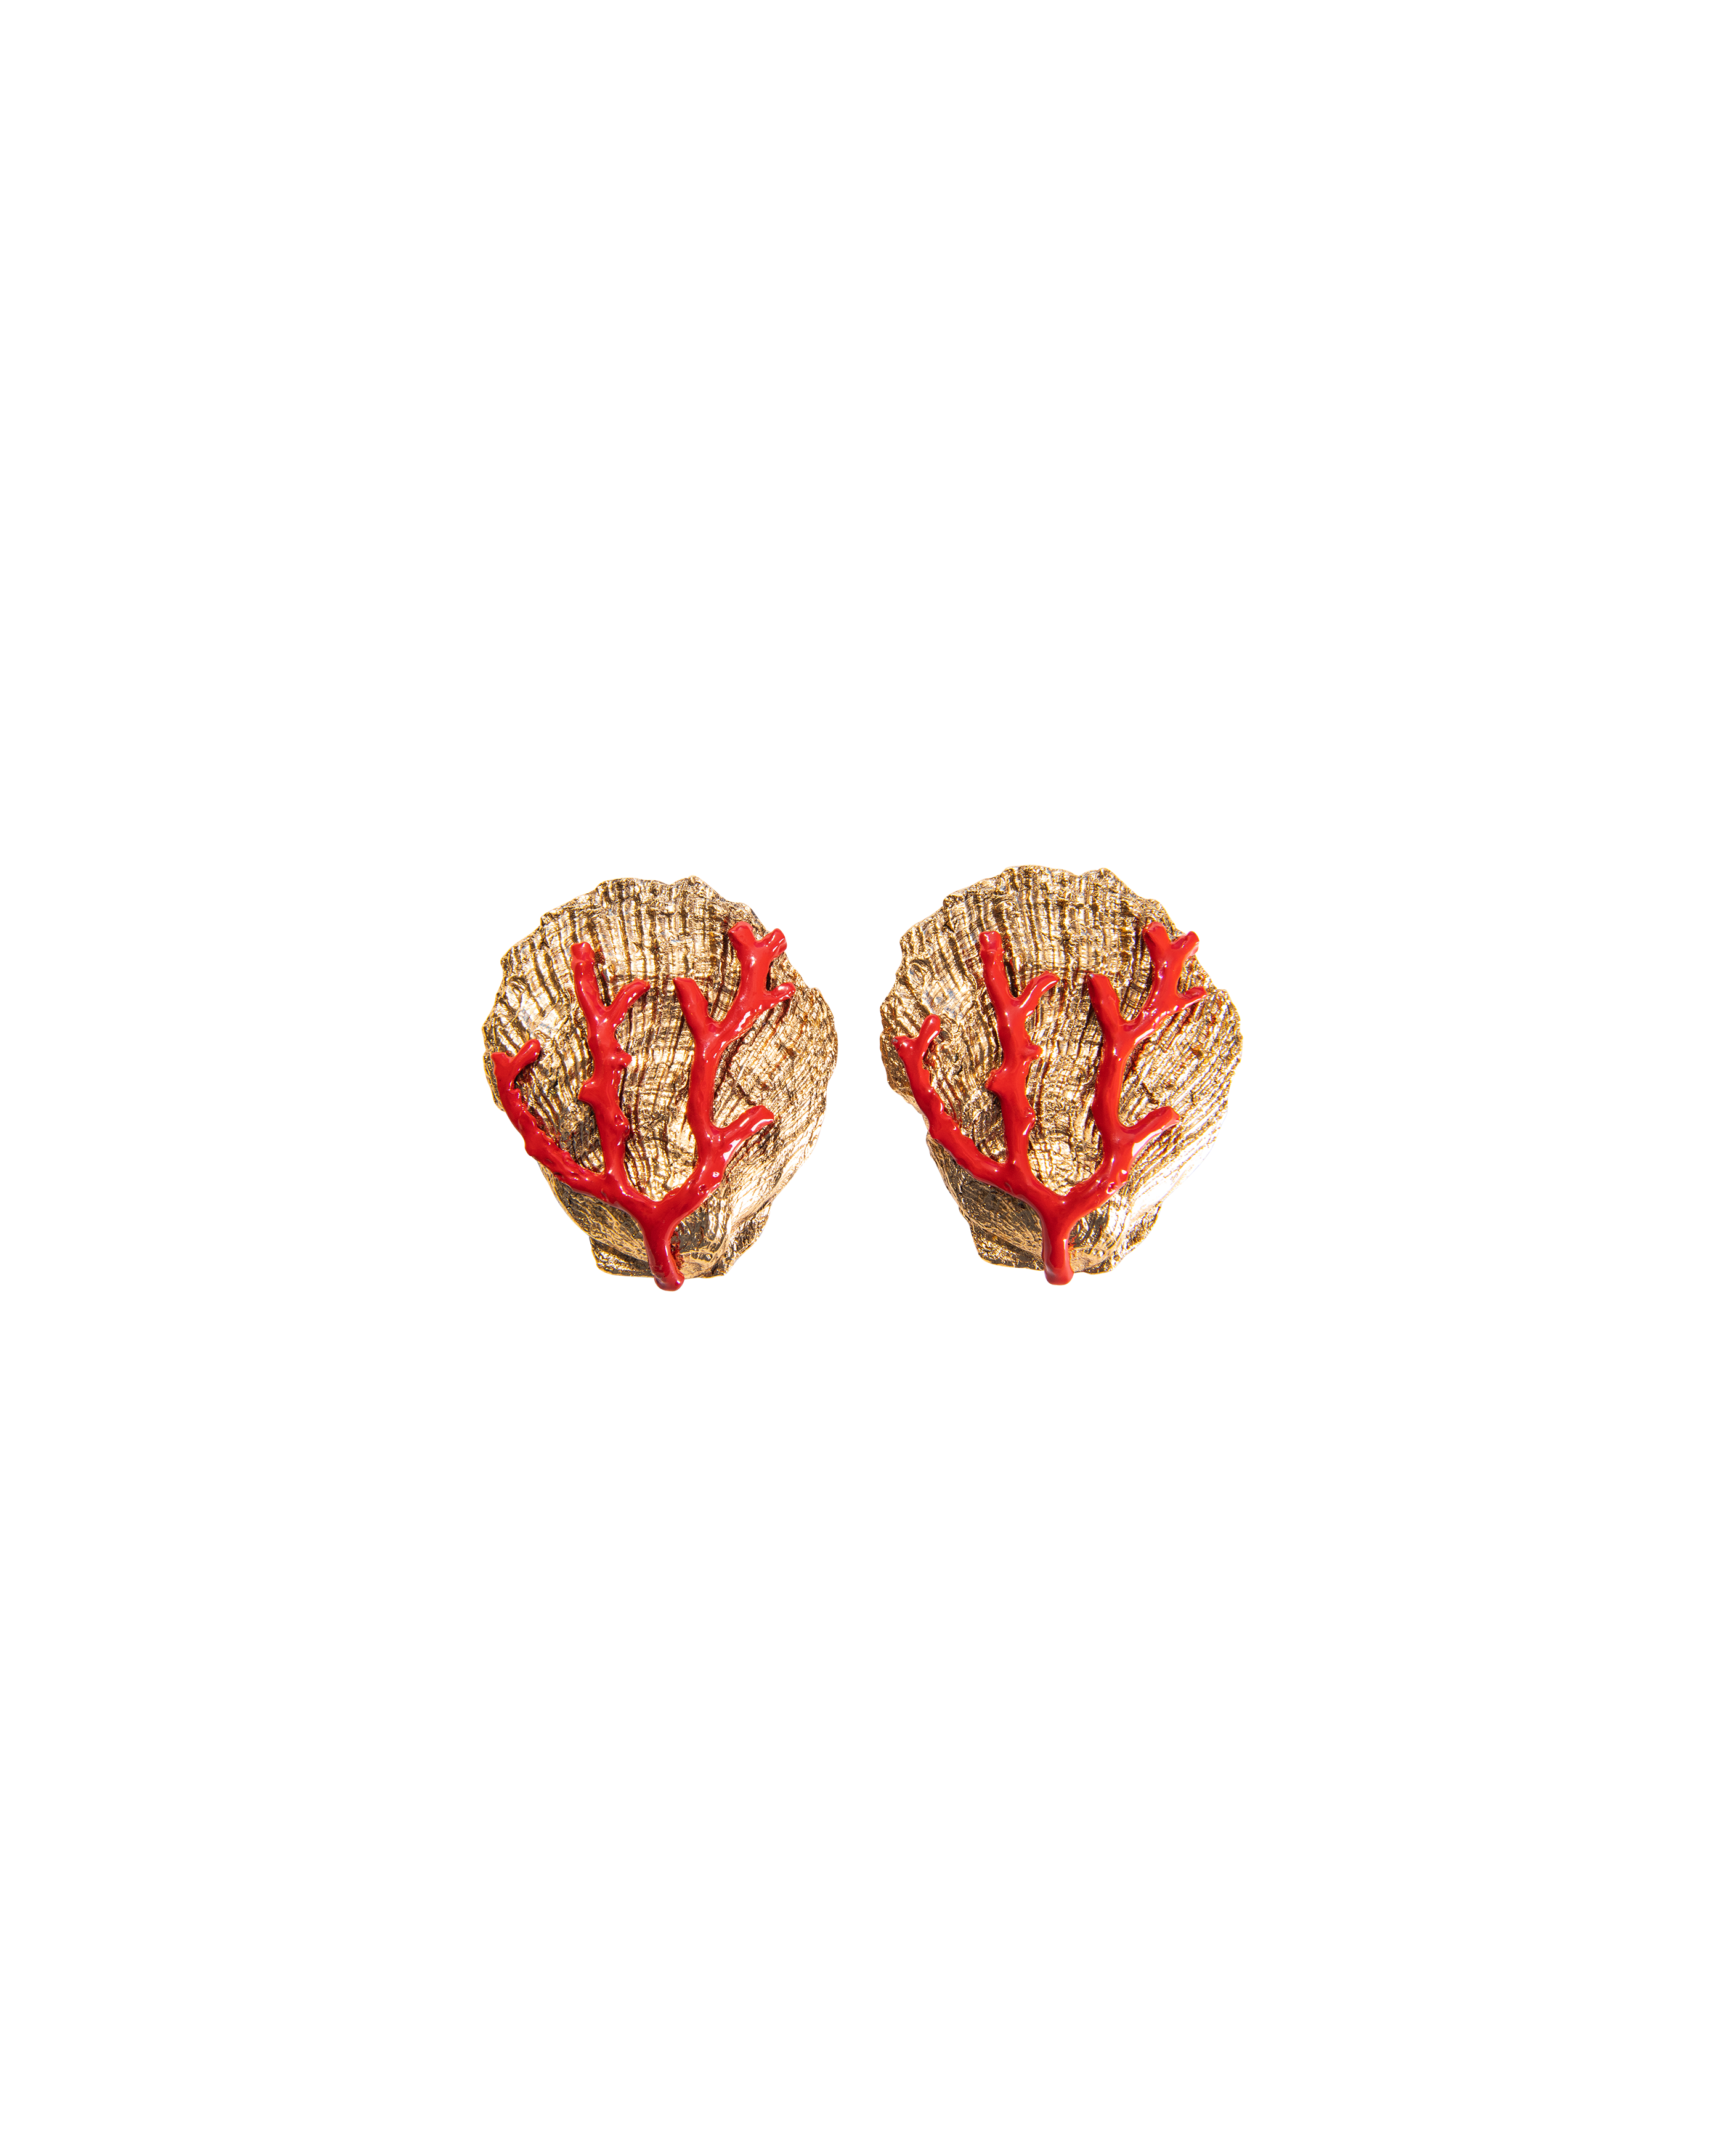 S/S 1979 Rive Gauche Gold Seashell Clip-On Earrings with Coral Detail